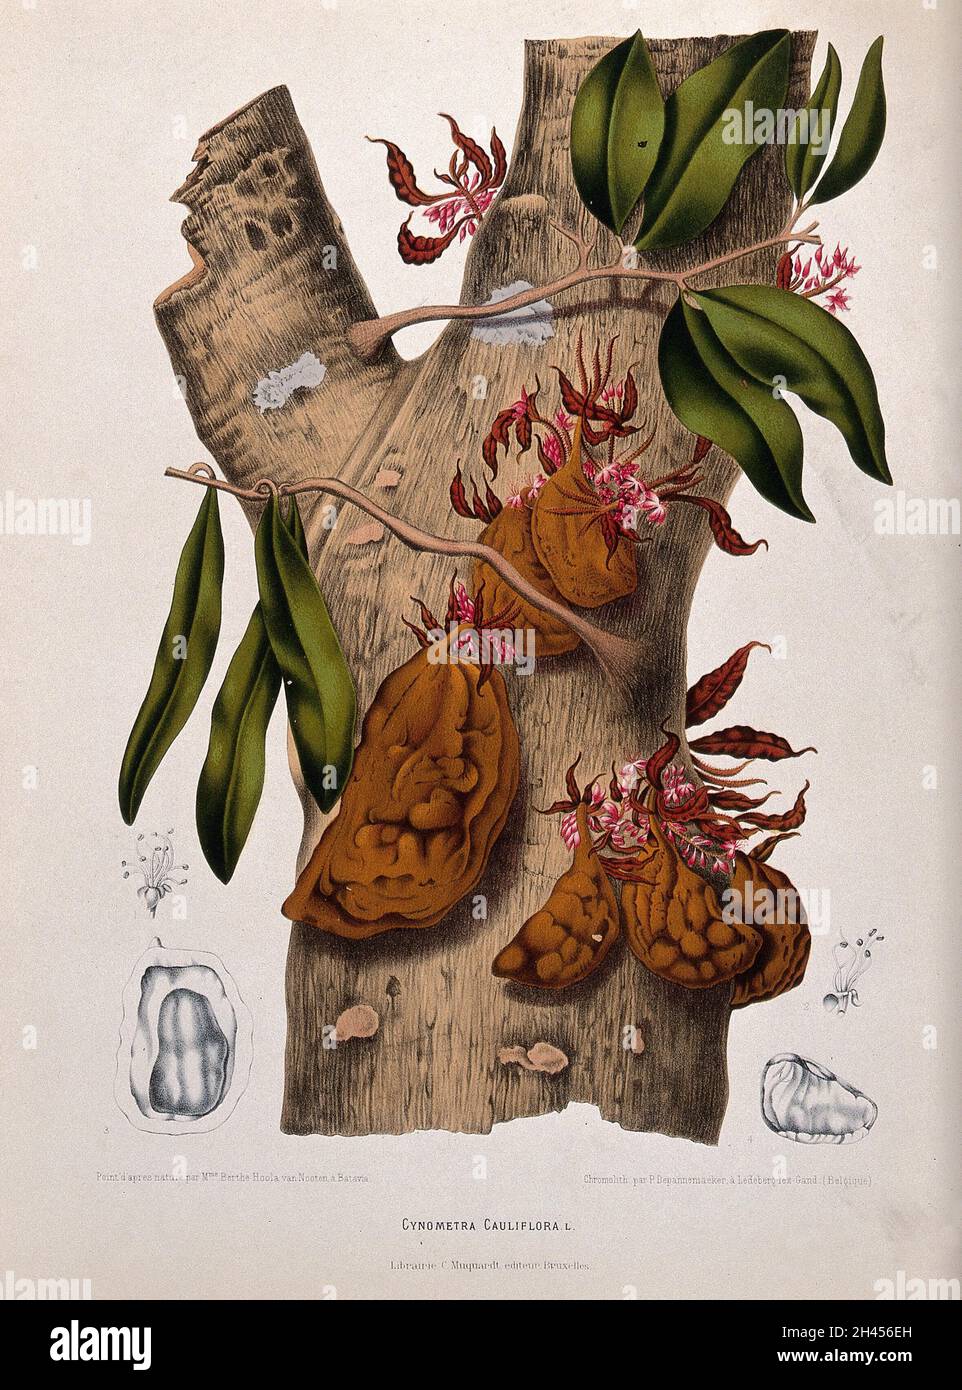 A plant (Cynometra cauliflora L.): trunk bearing flowers and fruit, and separate floral sections. Chromolithograph by P. Depannemaeker, c.1885, after B. Hoola van Nooten. Stock Photo